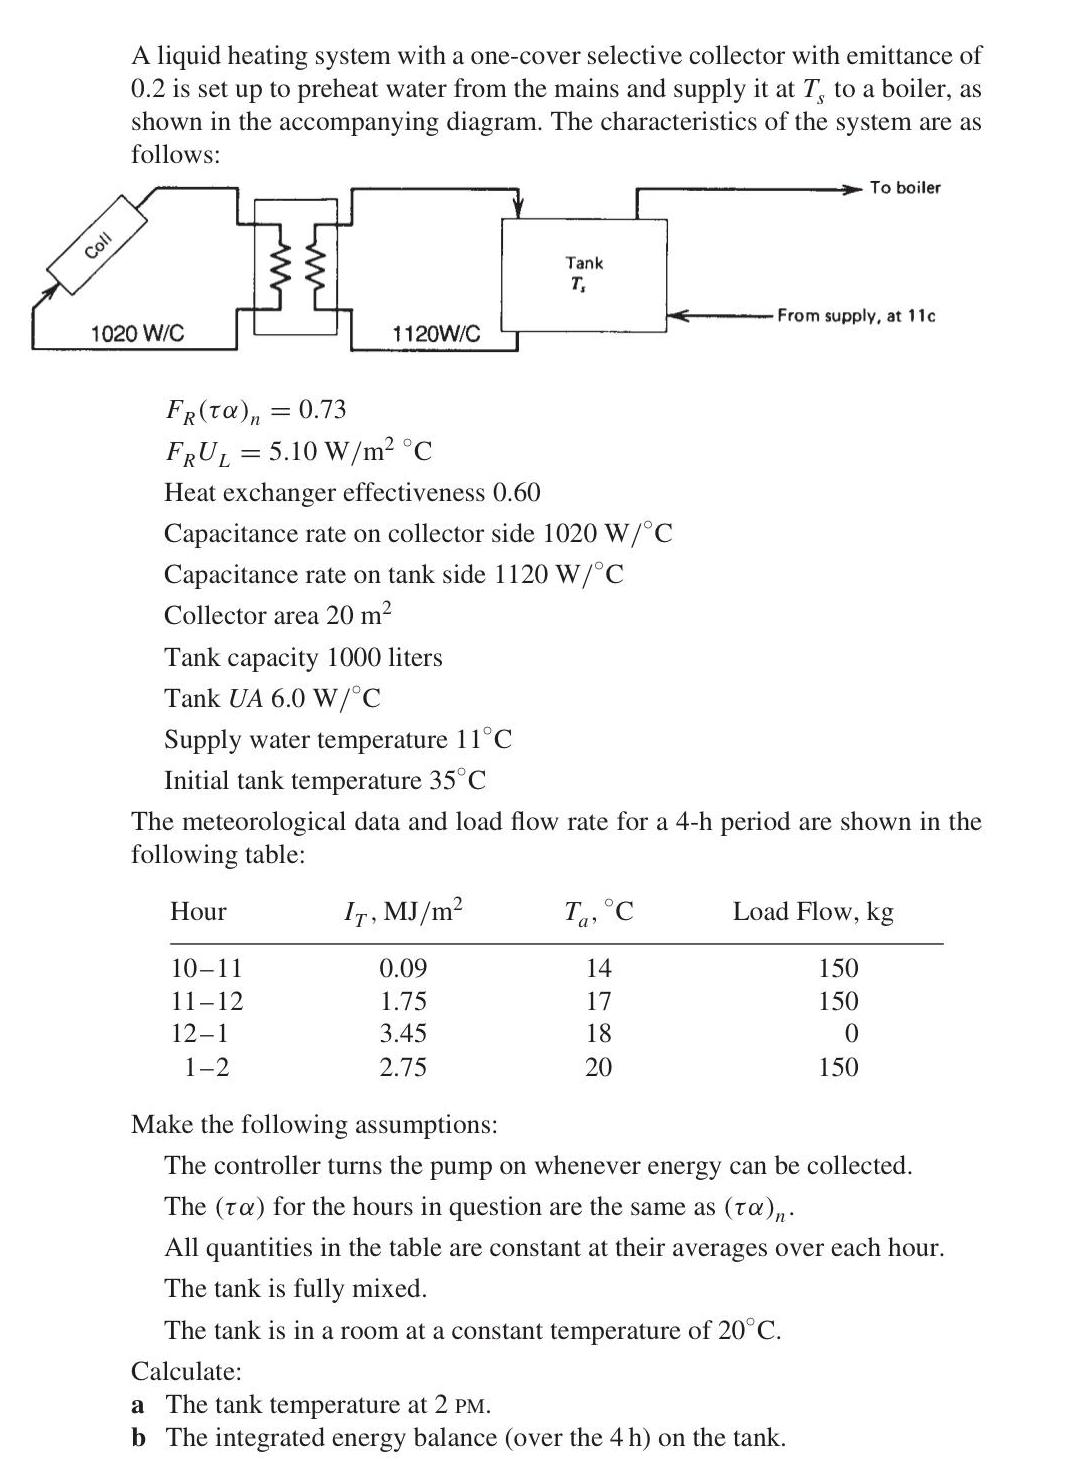 Coll A liquid heating system with a one-cover selective collector with emittance of 0.2 is set up to preheat